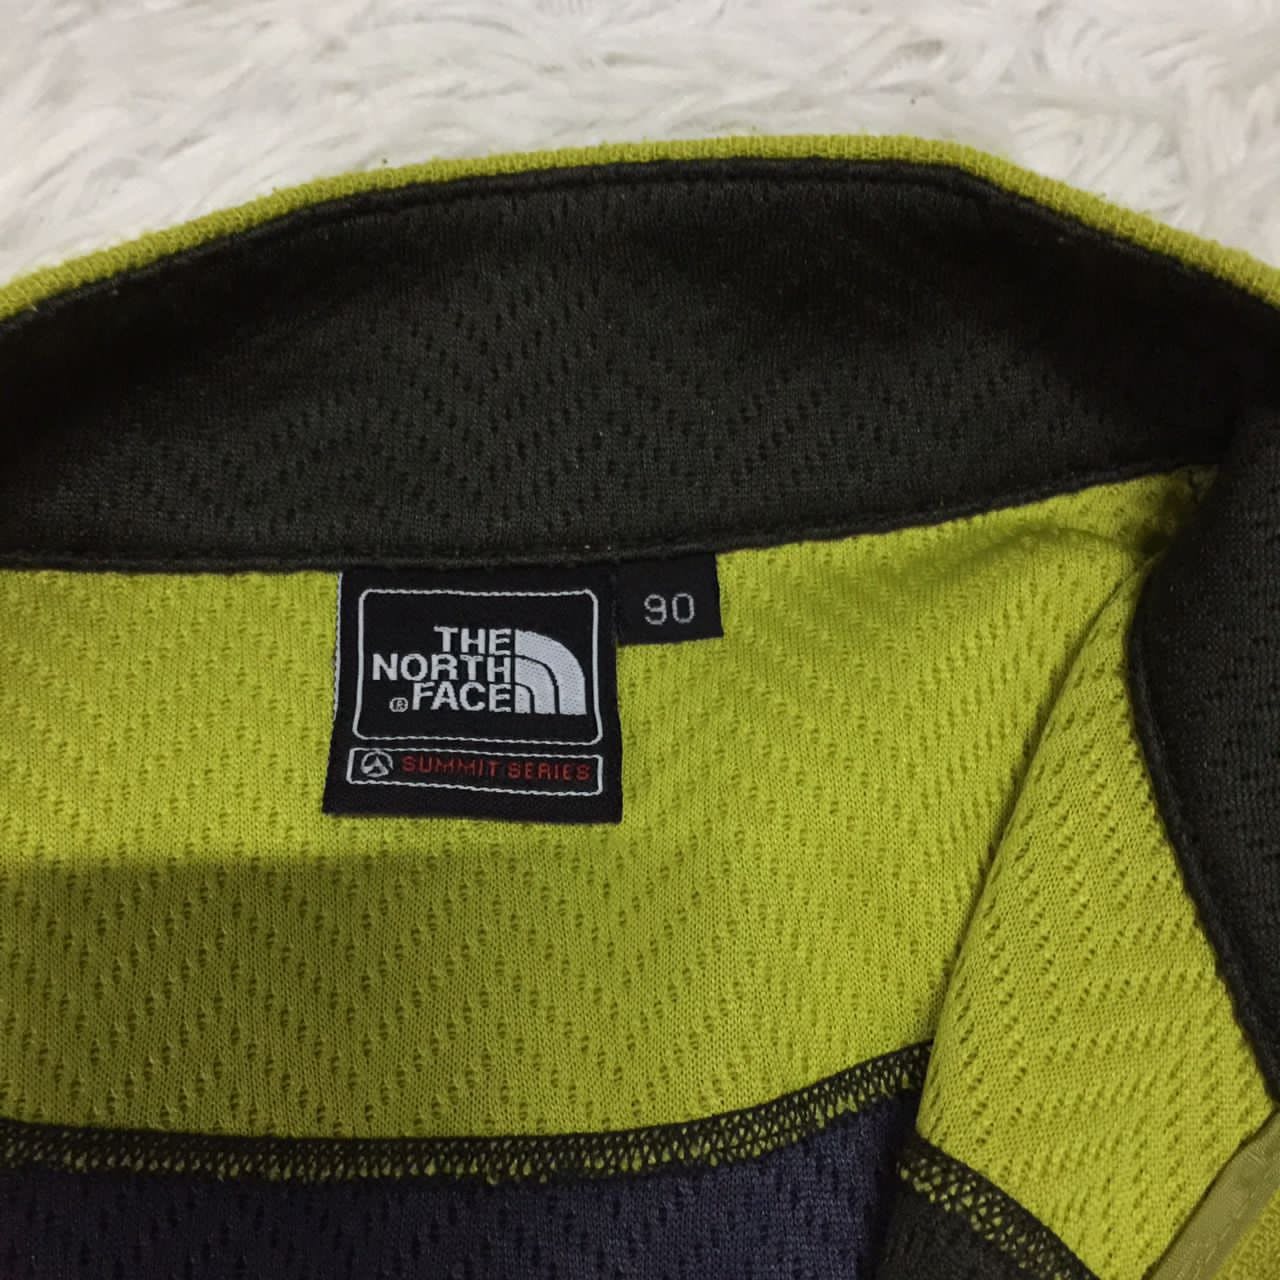 Vintage The North Face Sweater - 6